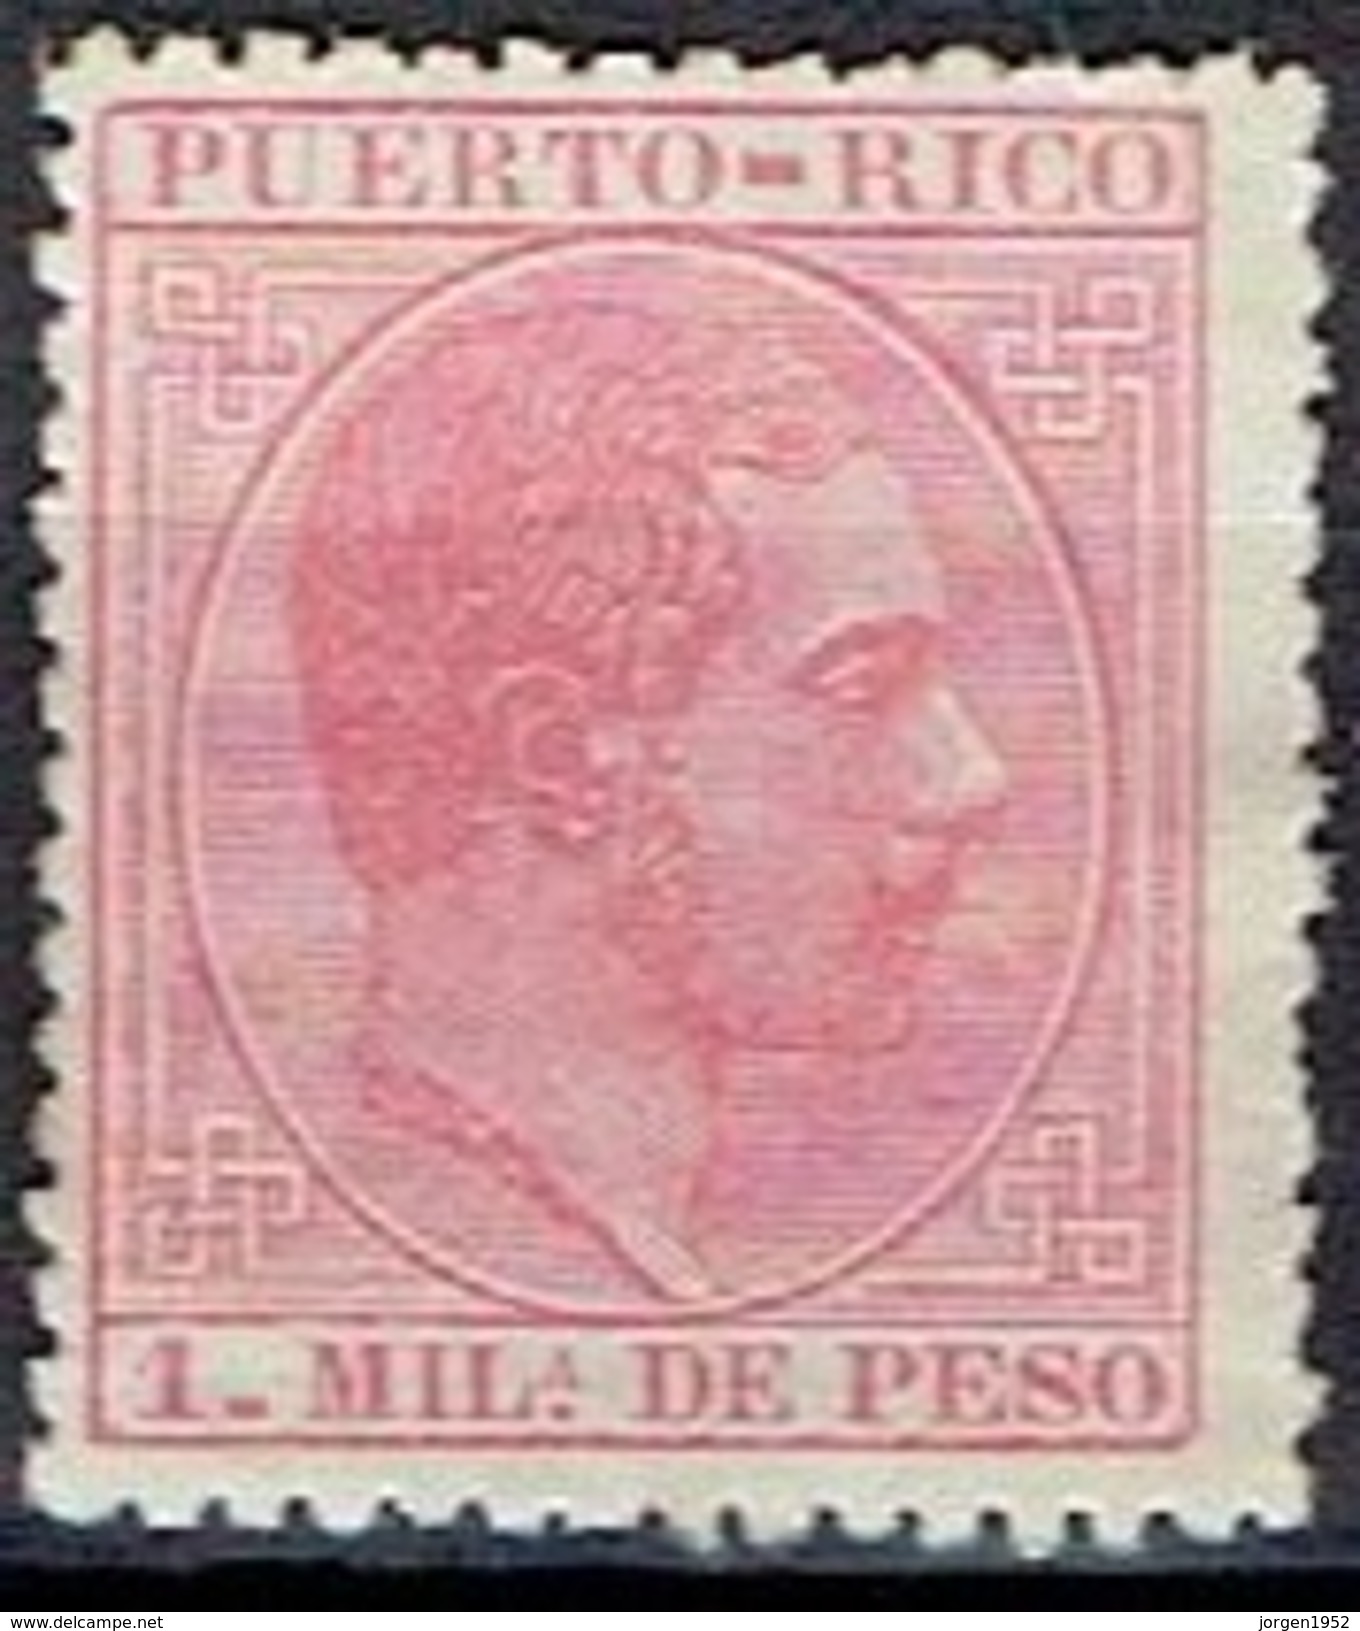 PUERTO RICO #  FROM 1884-85  STAMPWORLD 71* - Puerto Rico